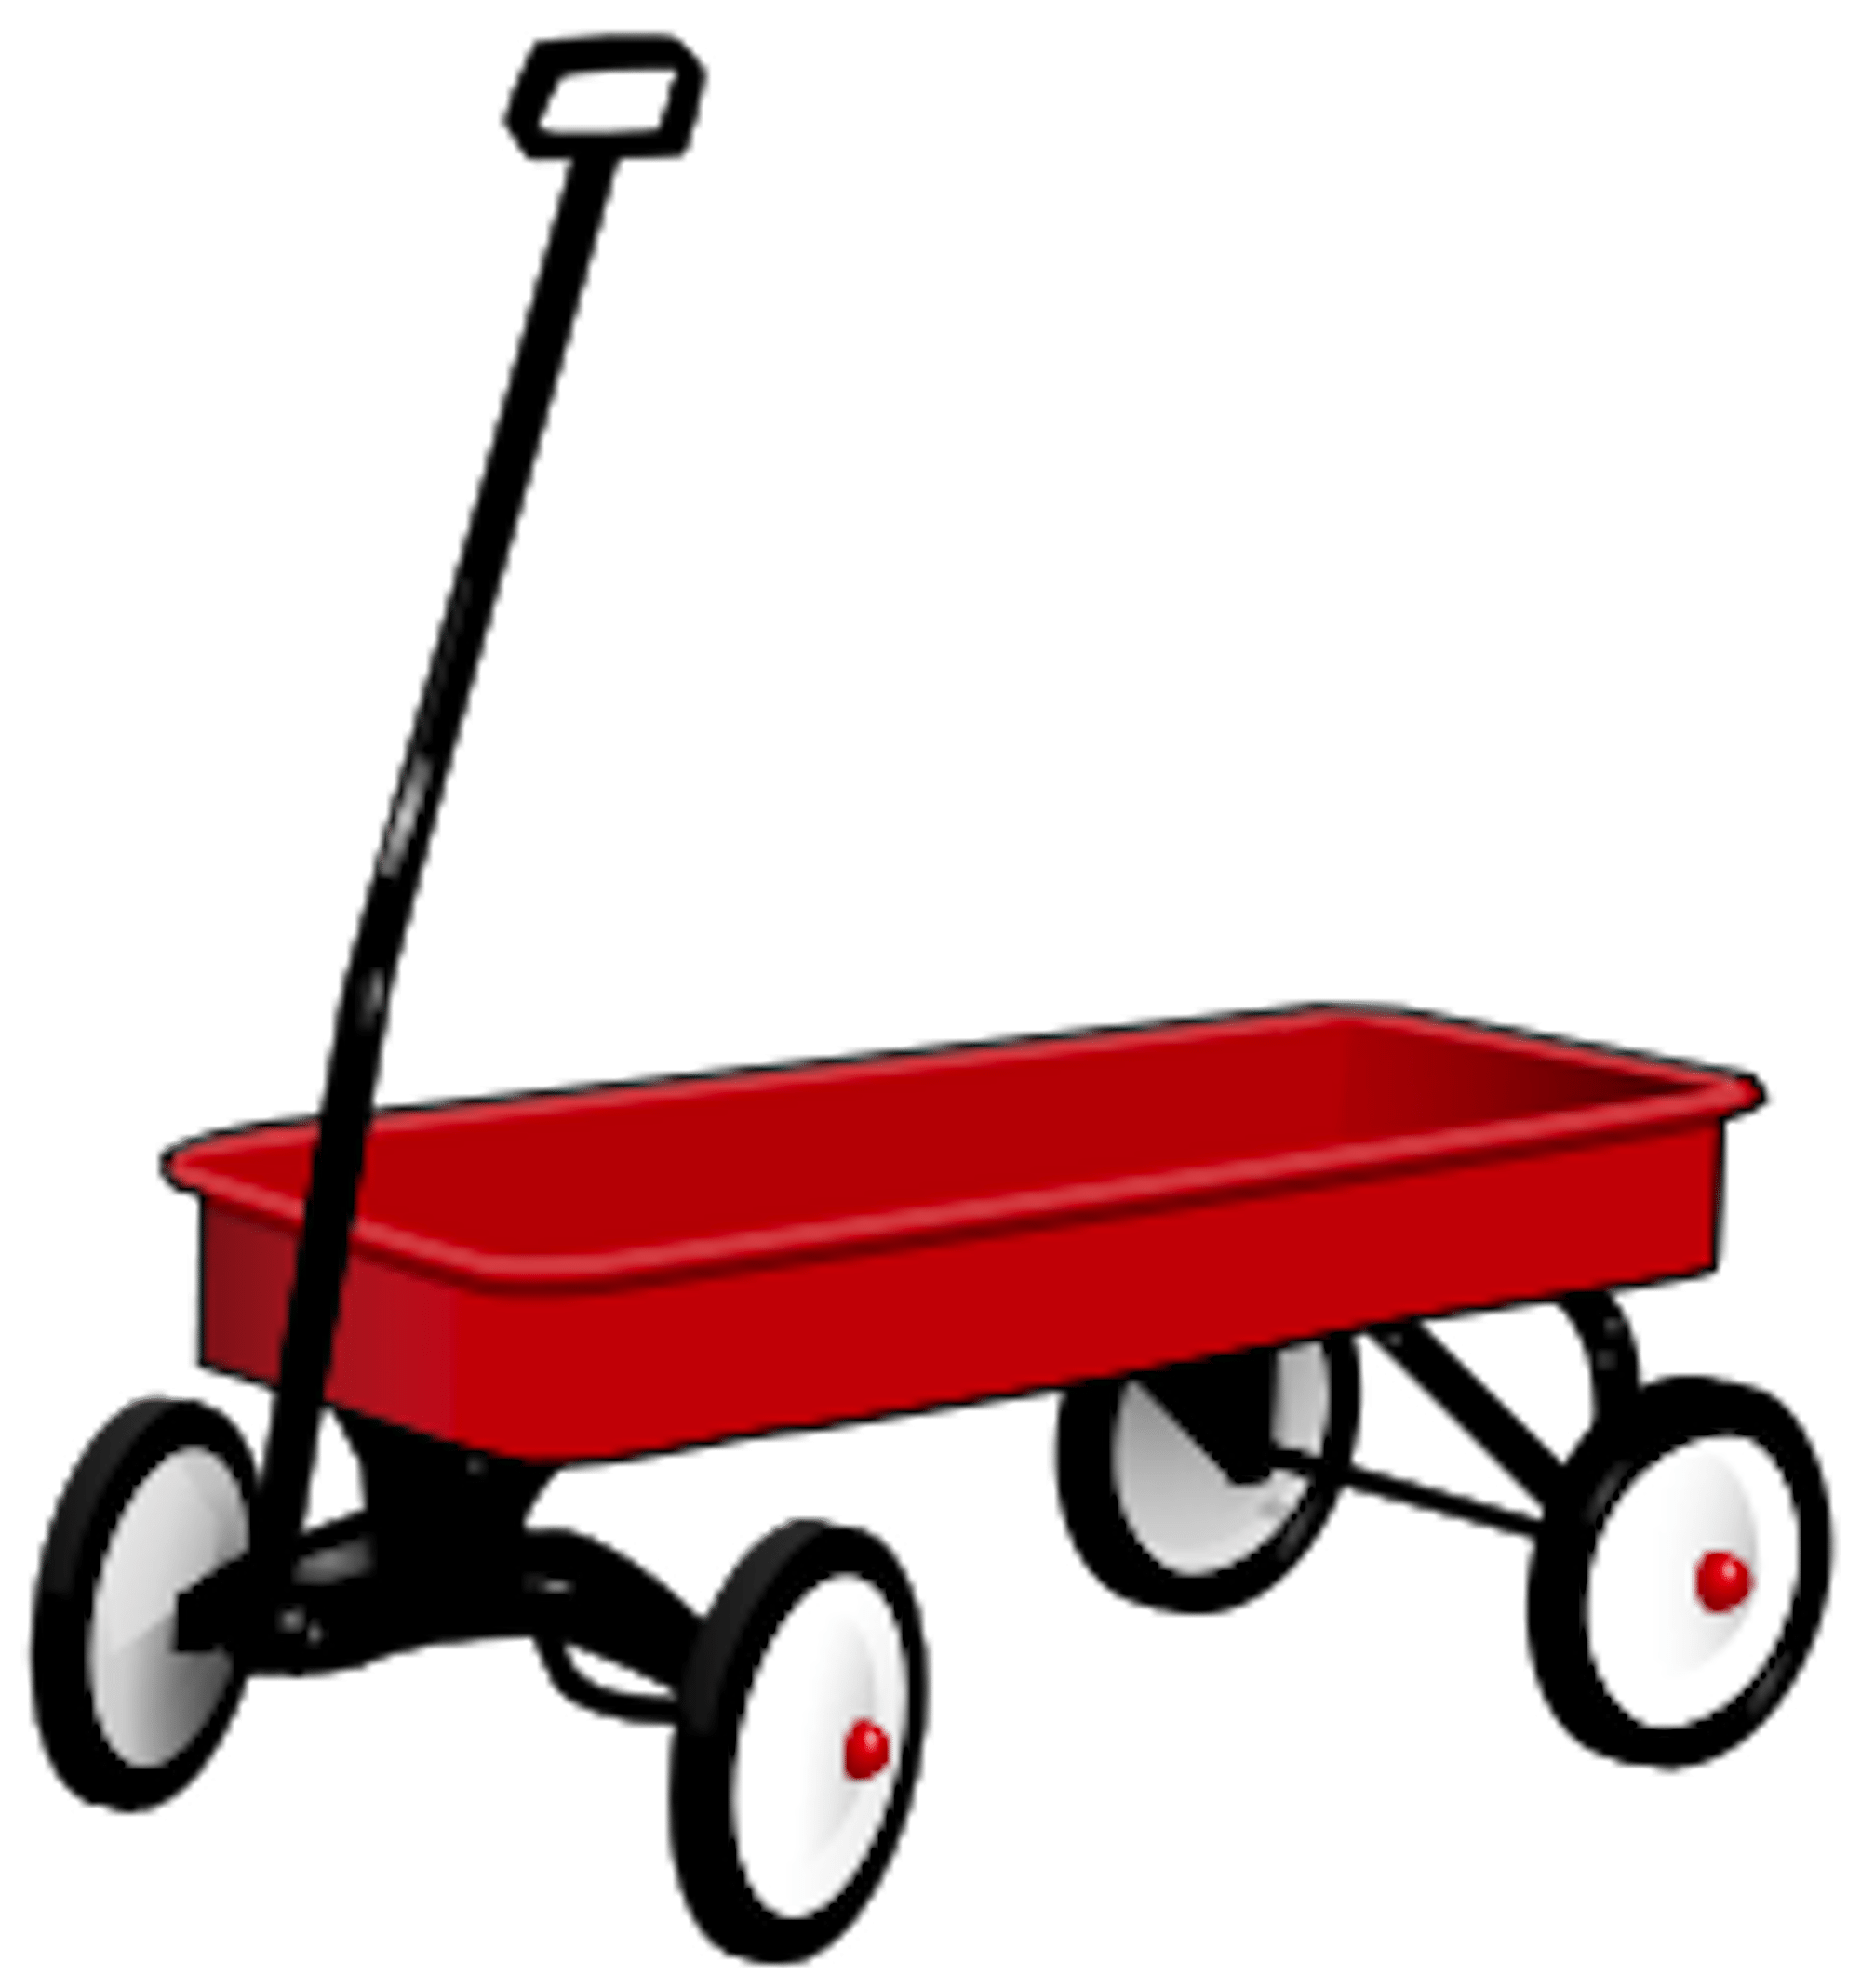 Little Red Wagon Day - A day that celebrates that red wagon toy that we could use to haul things in. #LittleRedWagonDay